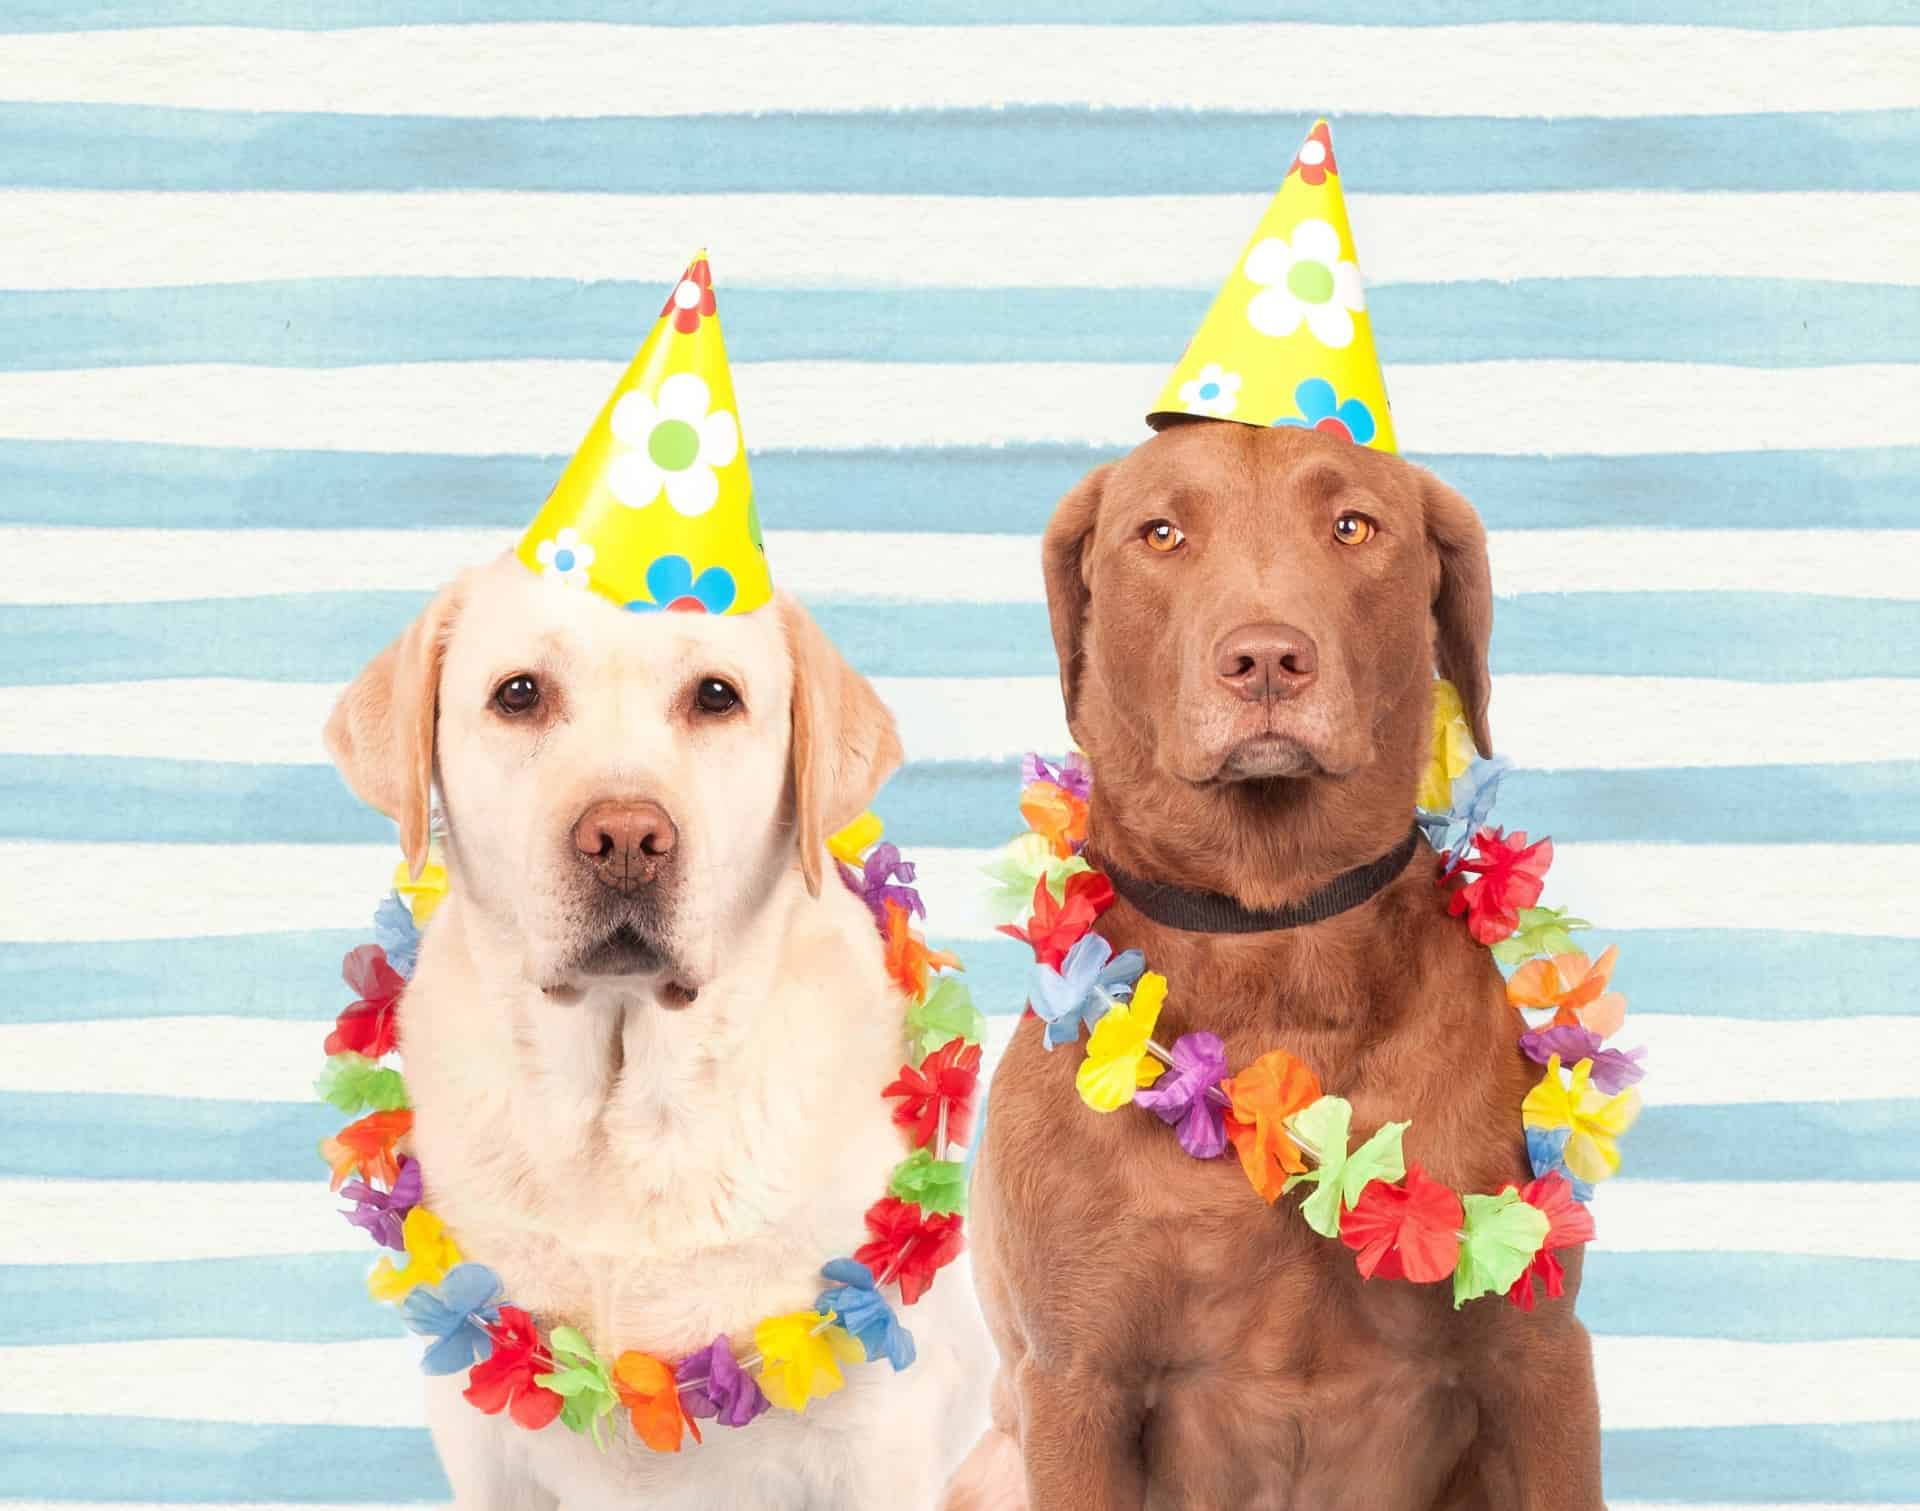 Stock photo of two dogs wearing party hats and leis. They look very uncomfortable, like they're wating for something to happen.